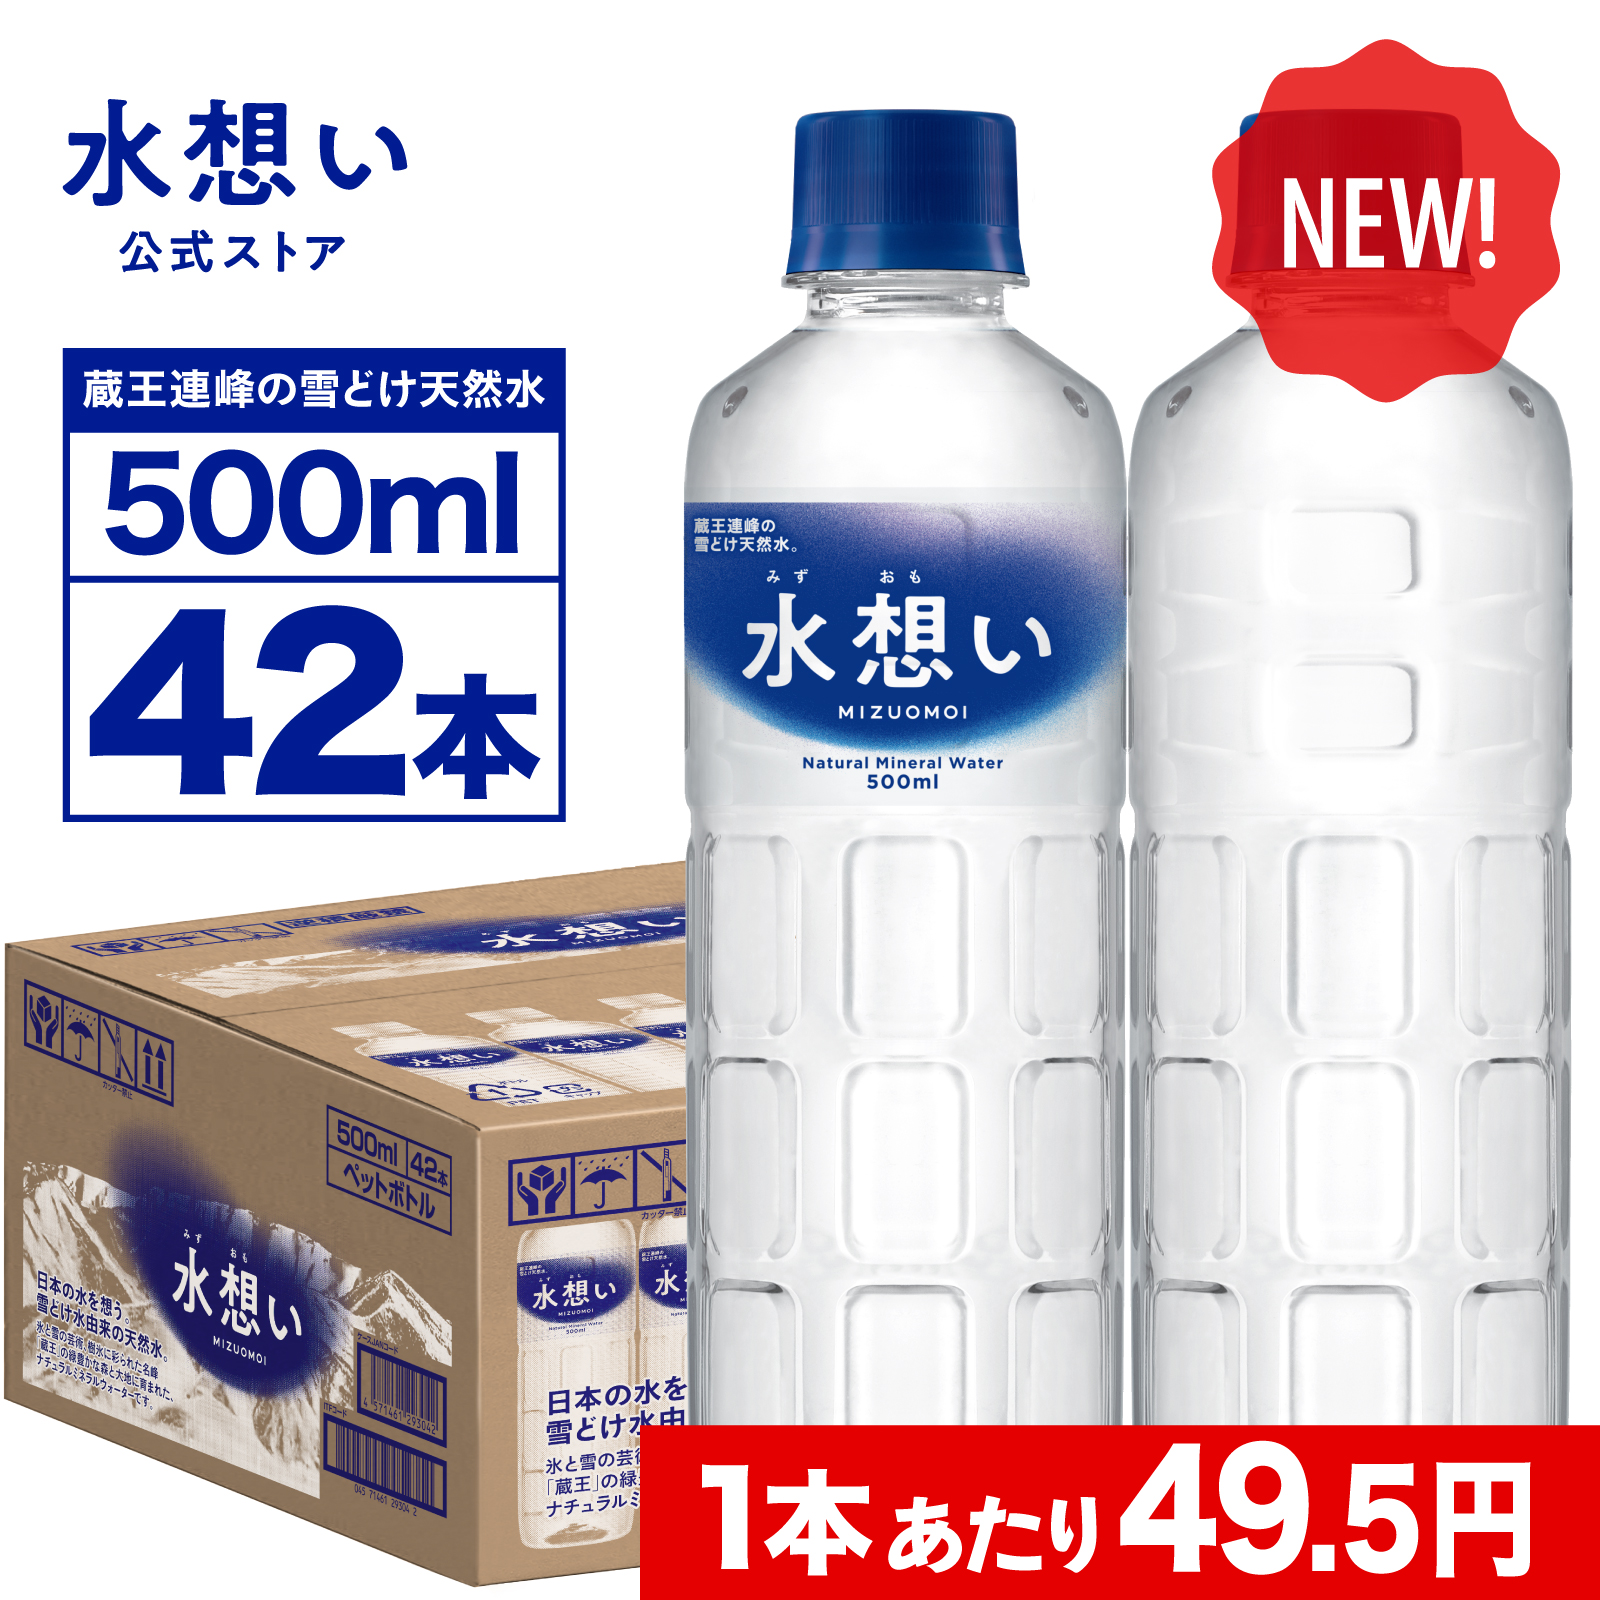  water mineral water natural water 1 pcs per 49.5 jpy 365 day shipping correspondence label less water ..500ml 42 pcs insertion .. water domestic production water